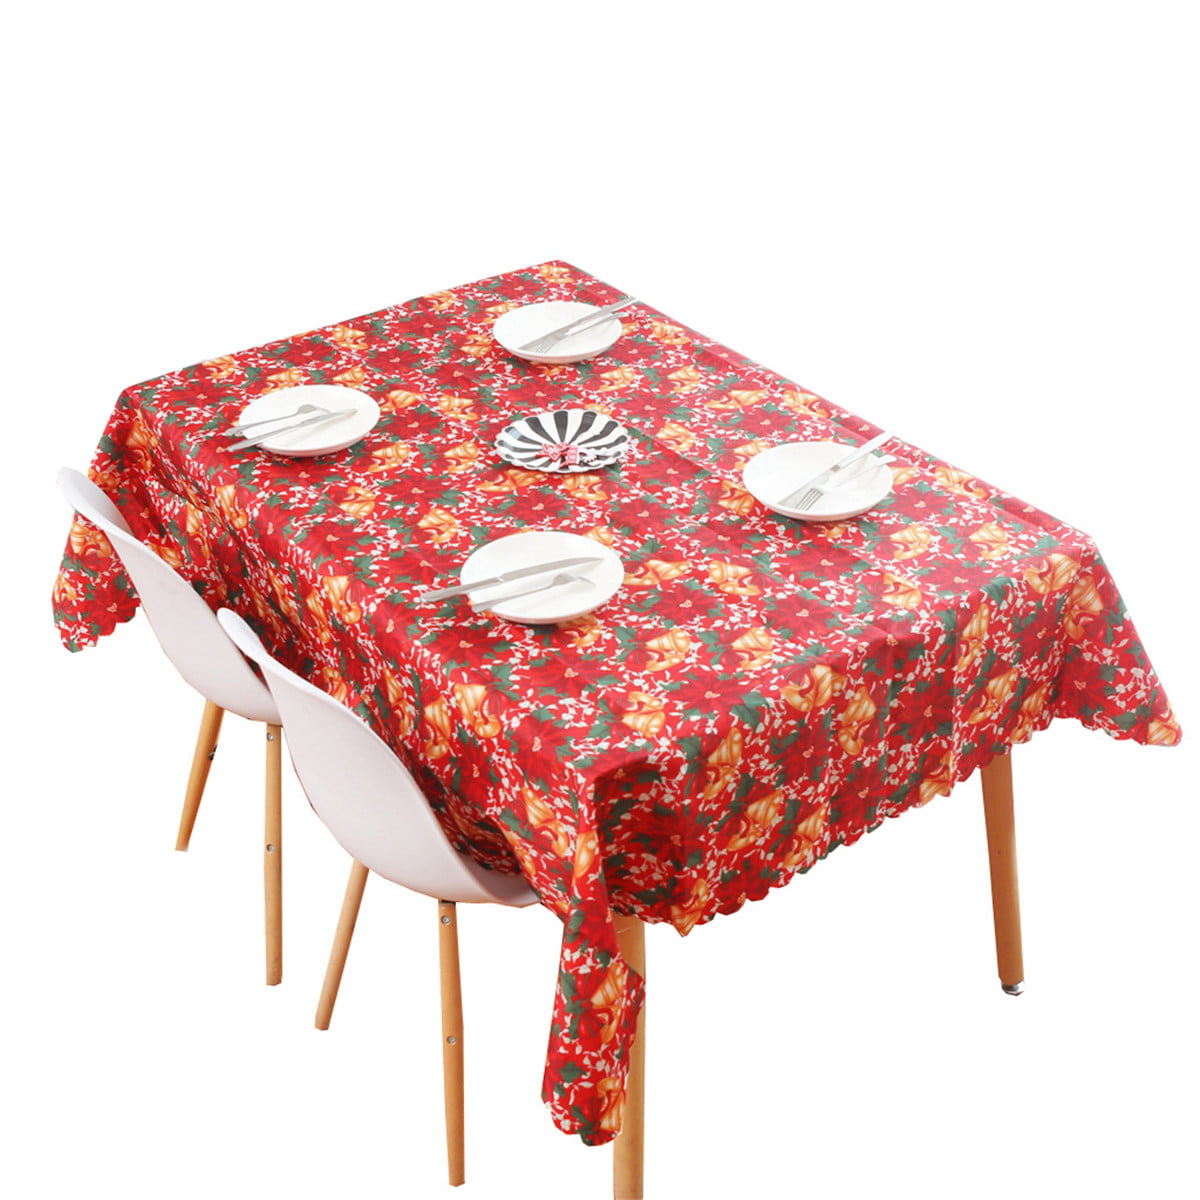 CHRISTMAS SNOWMAN VINYL EASY CLEAN INDOOR AND OUTDOOR TABLECLOTH PRICE PER METRE 